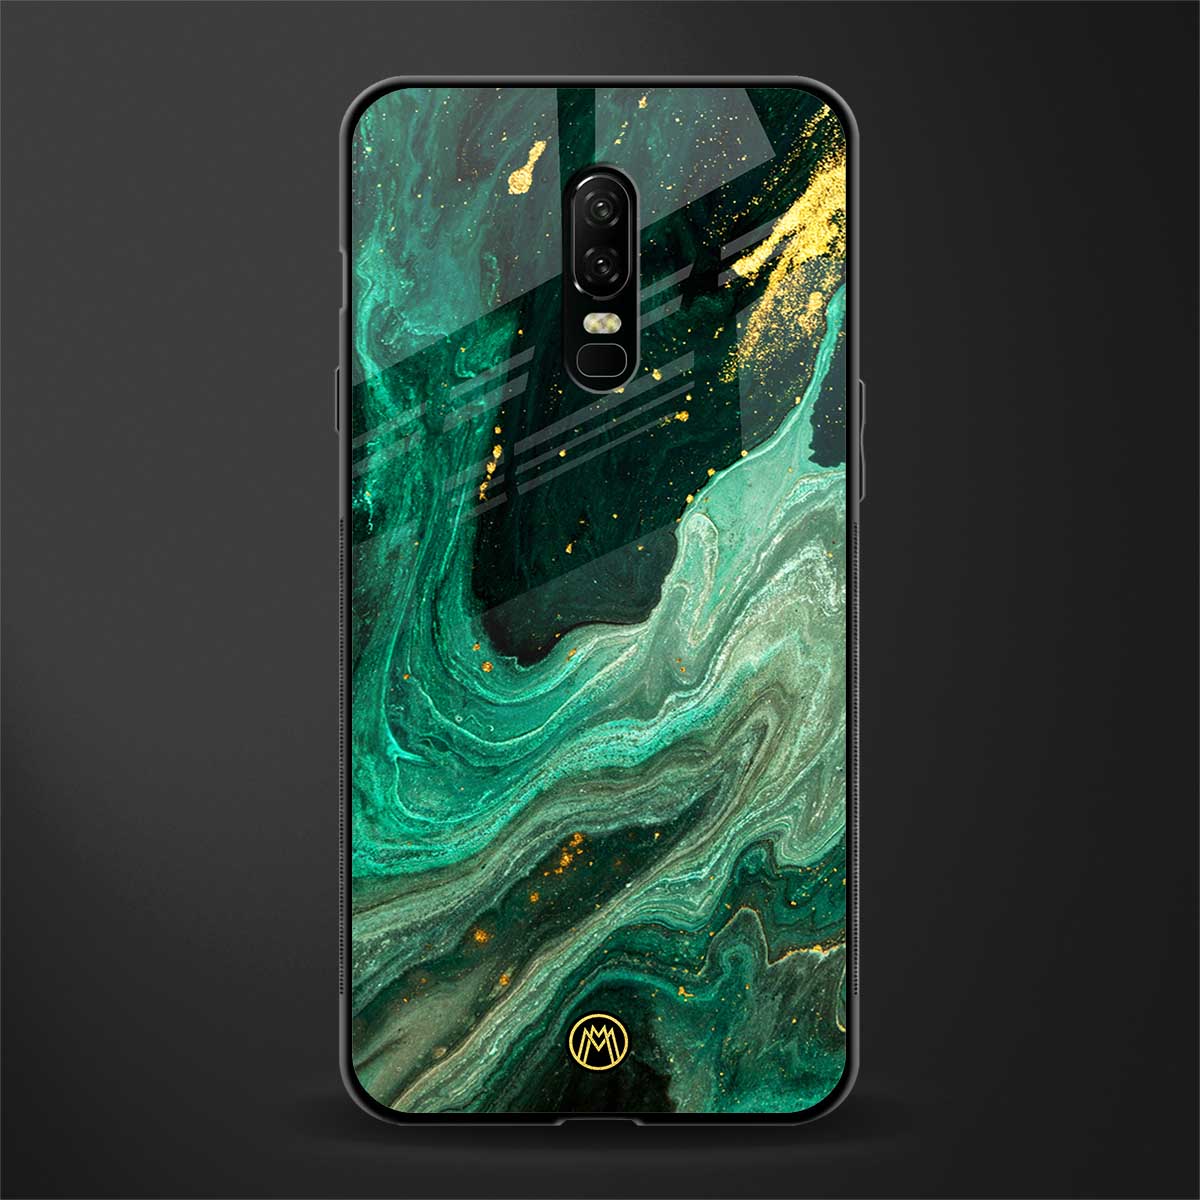 emerald pool glass case for oneplus 6 image